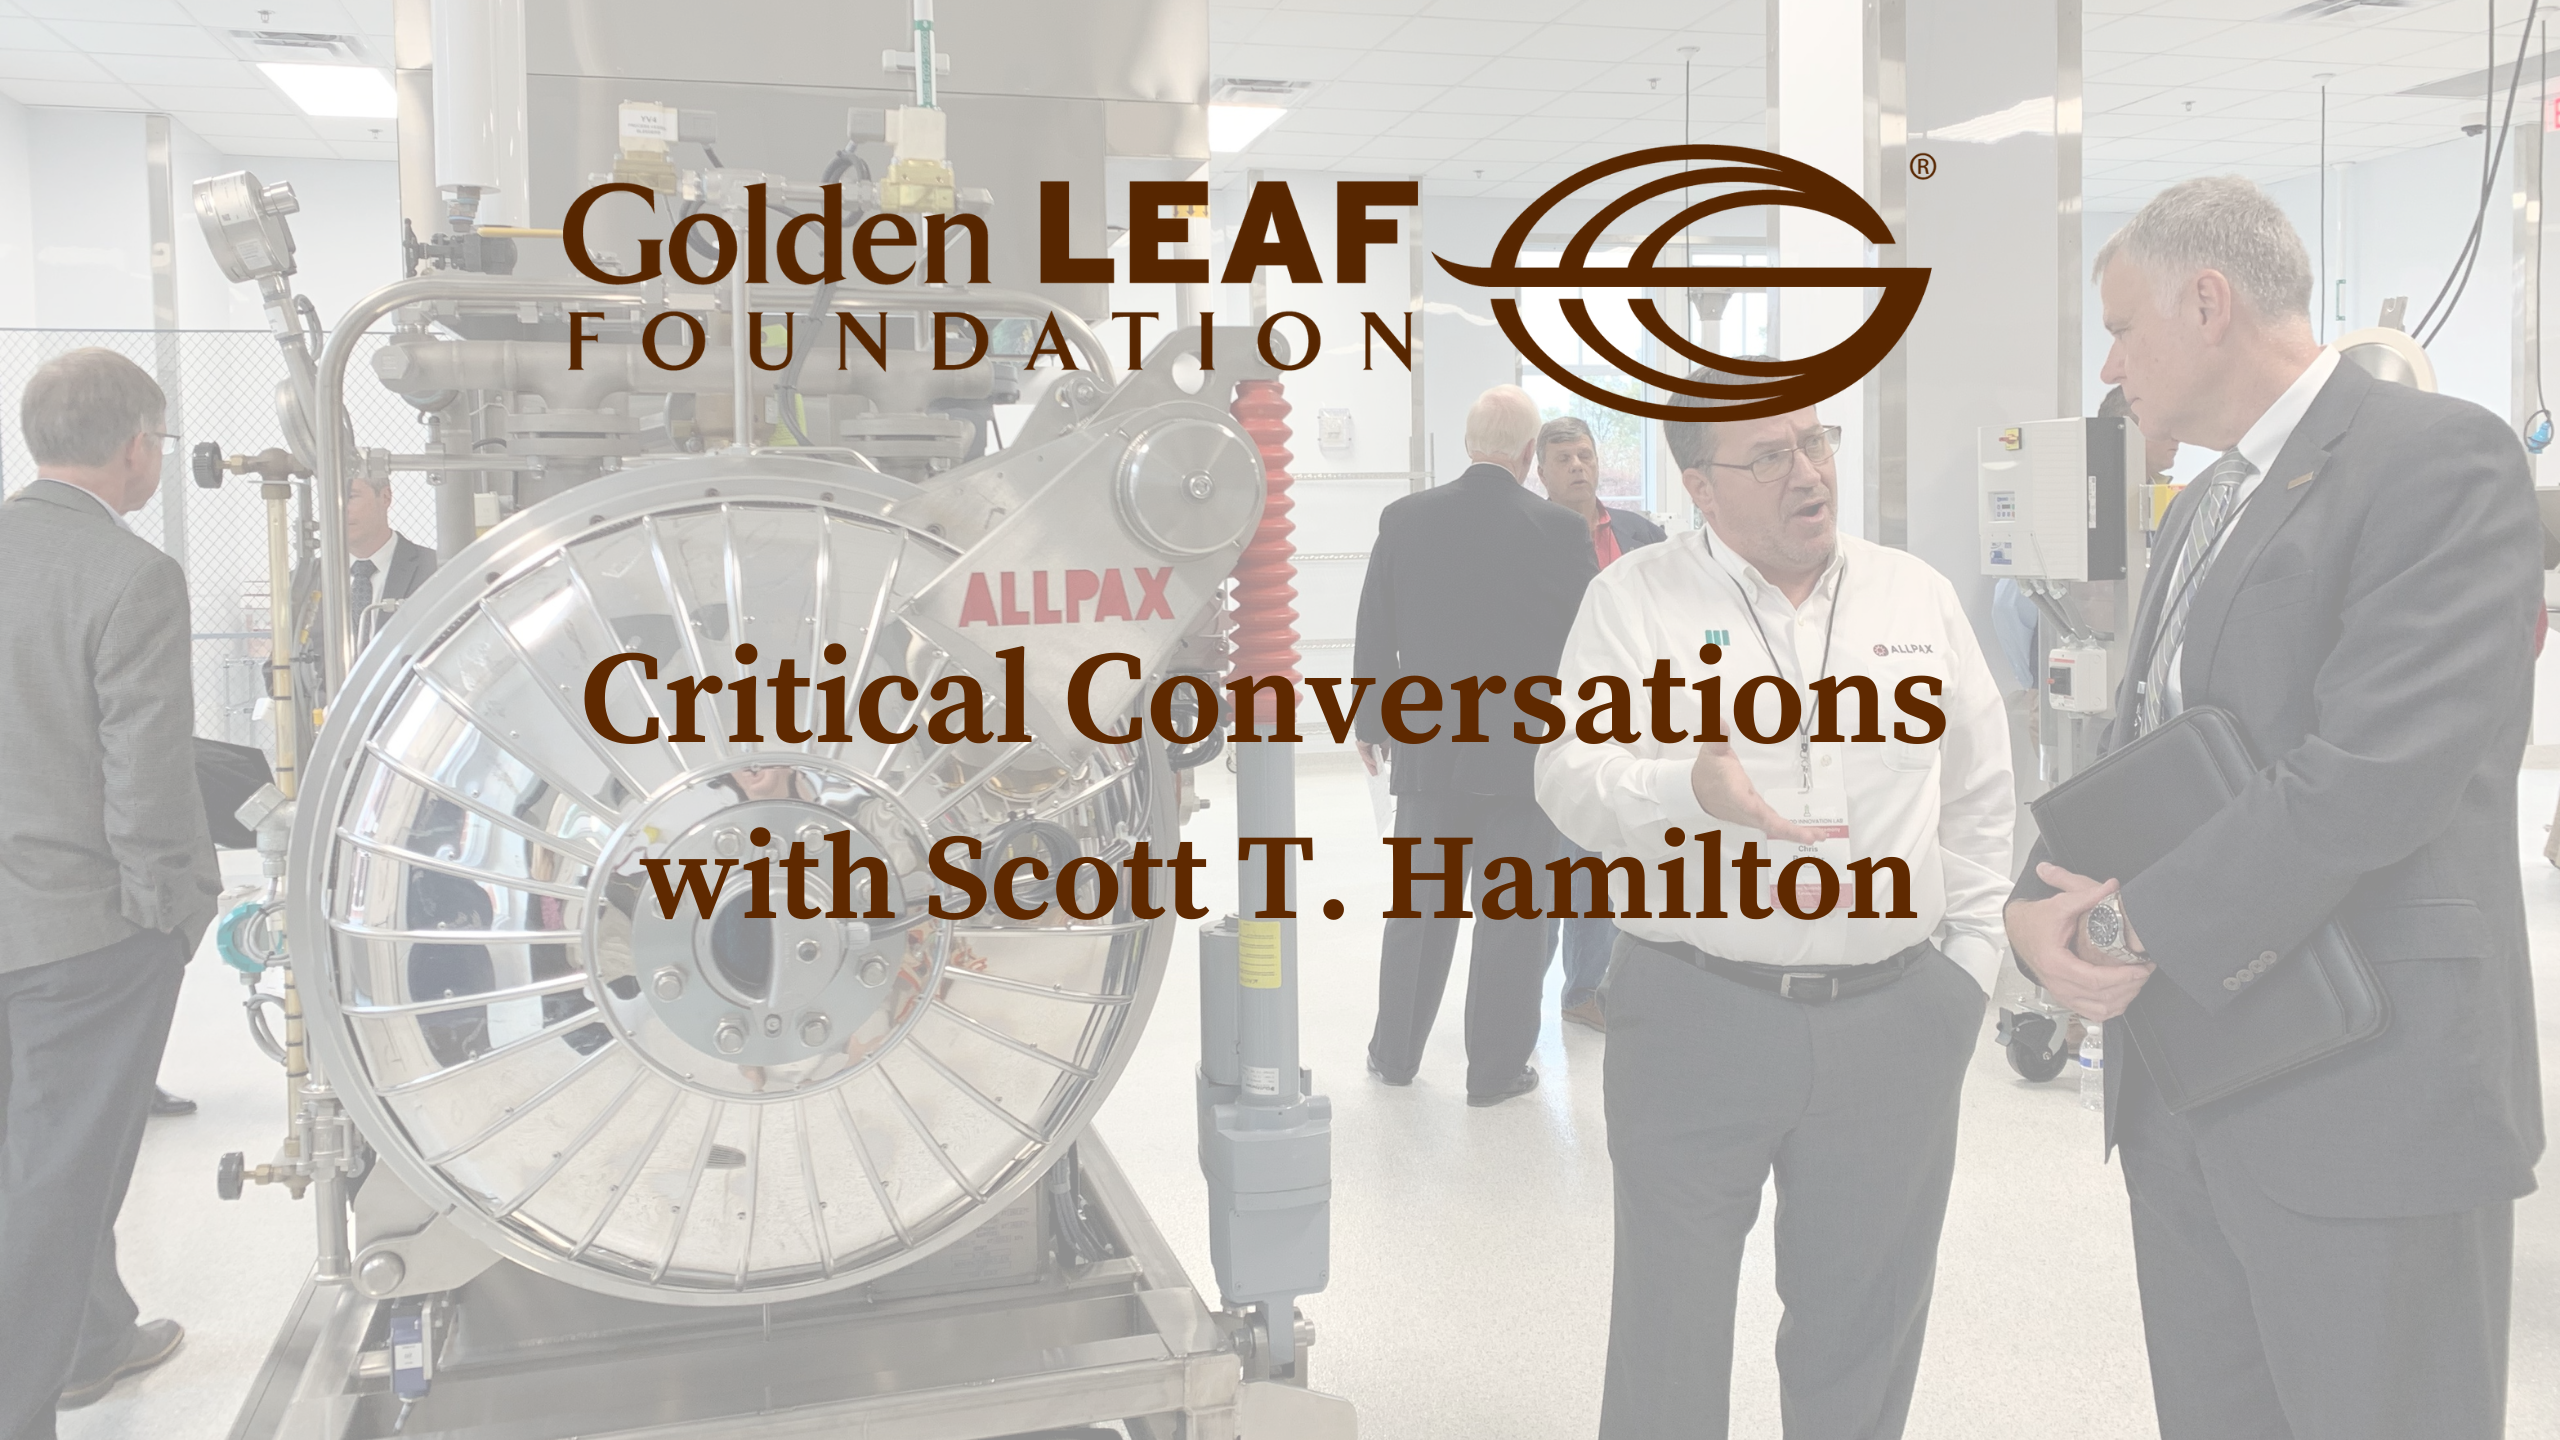 Critical Conversations with Scott T. Hamilton featuring Tracy Doaks, President and Chief Executive Officer of MCNC